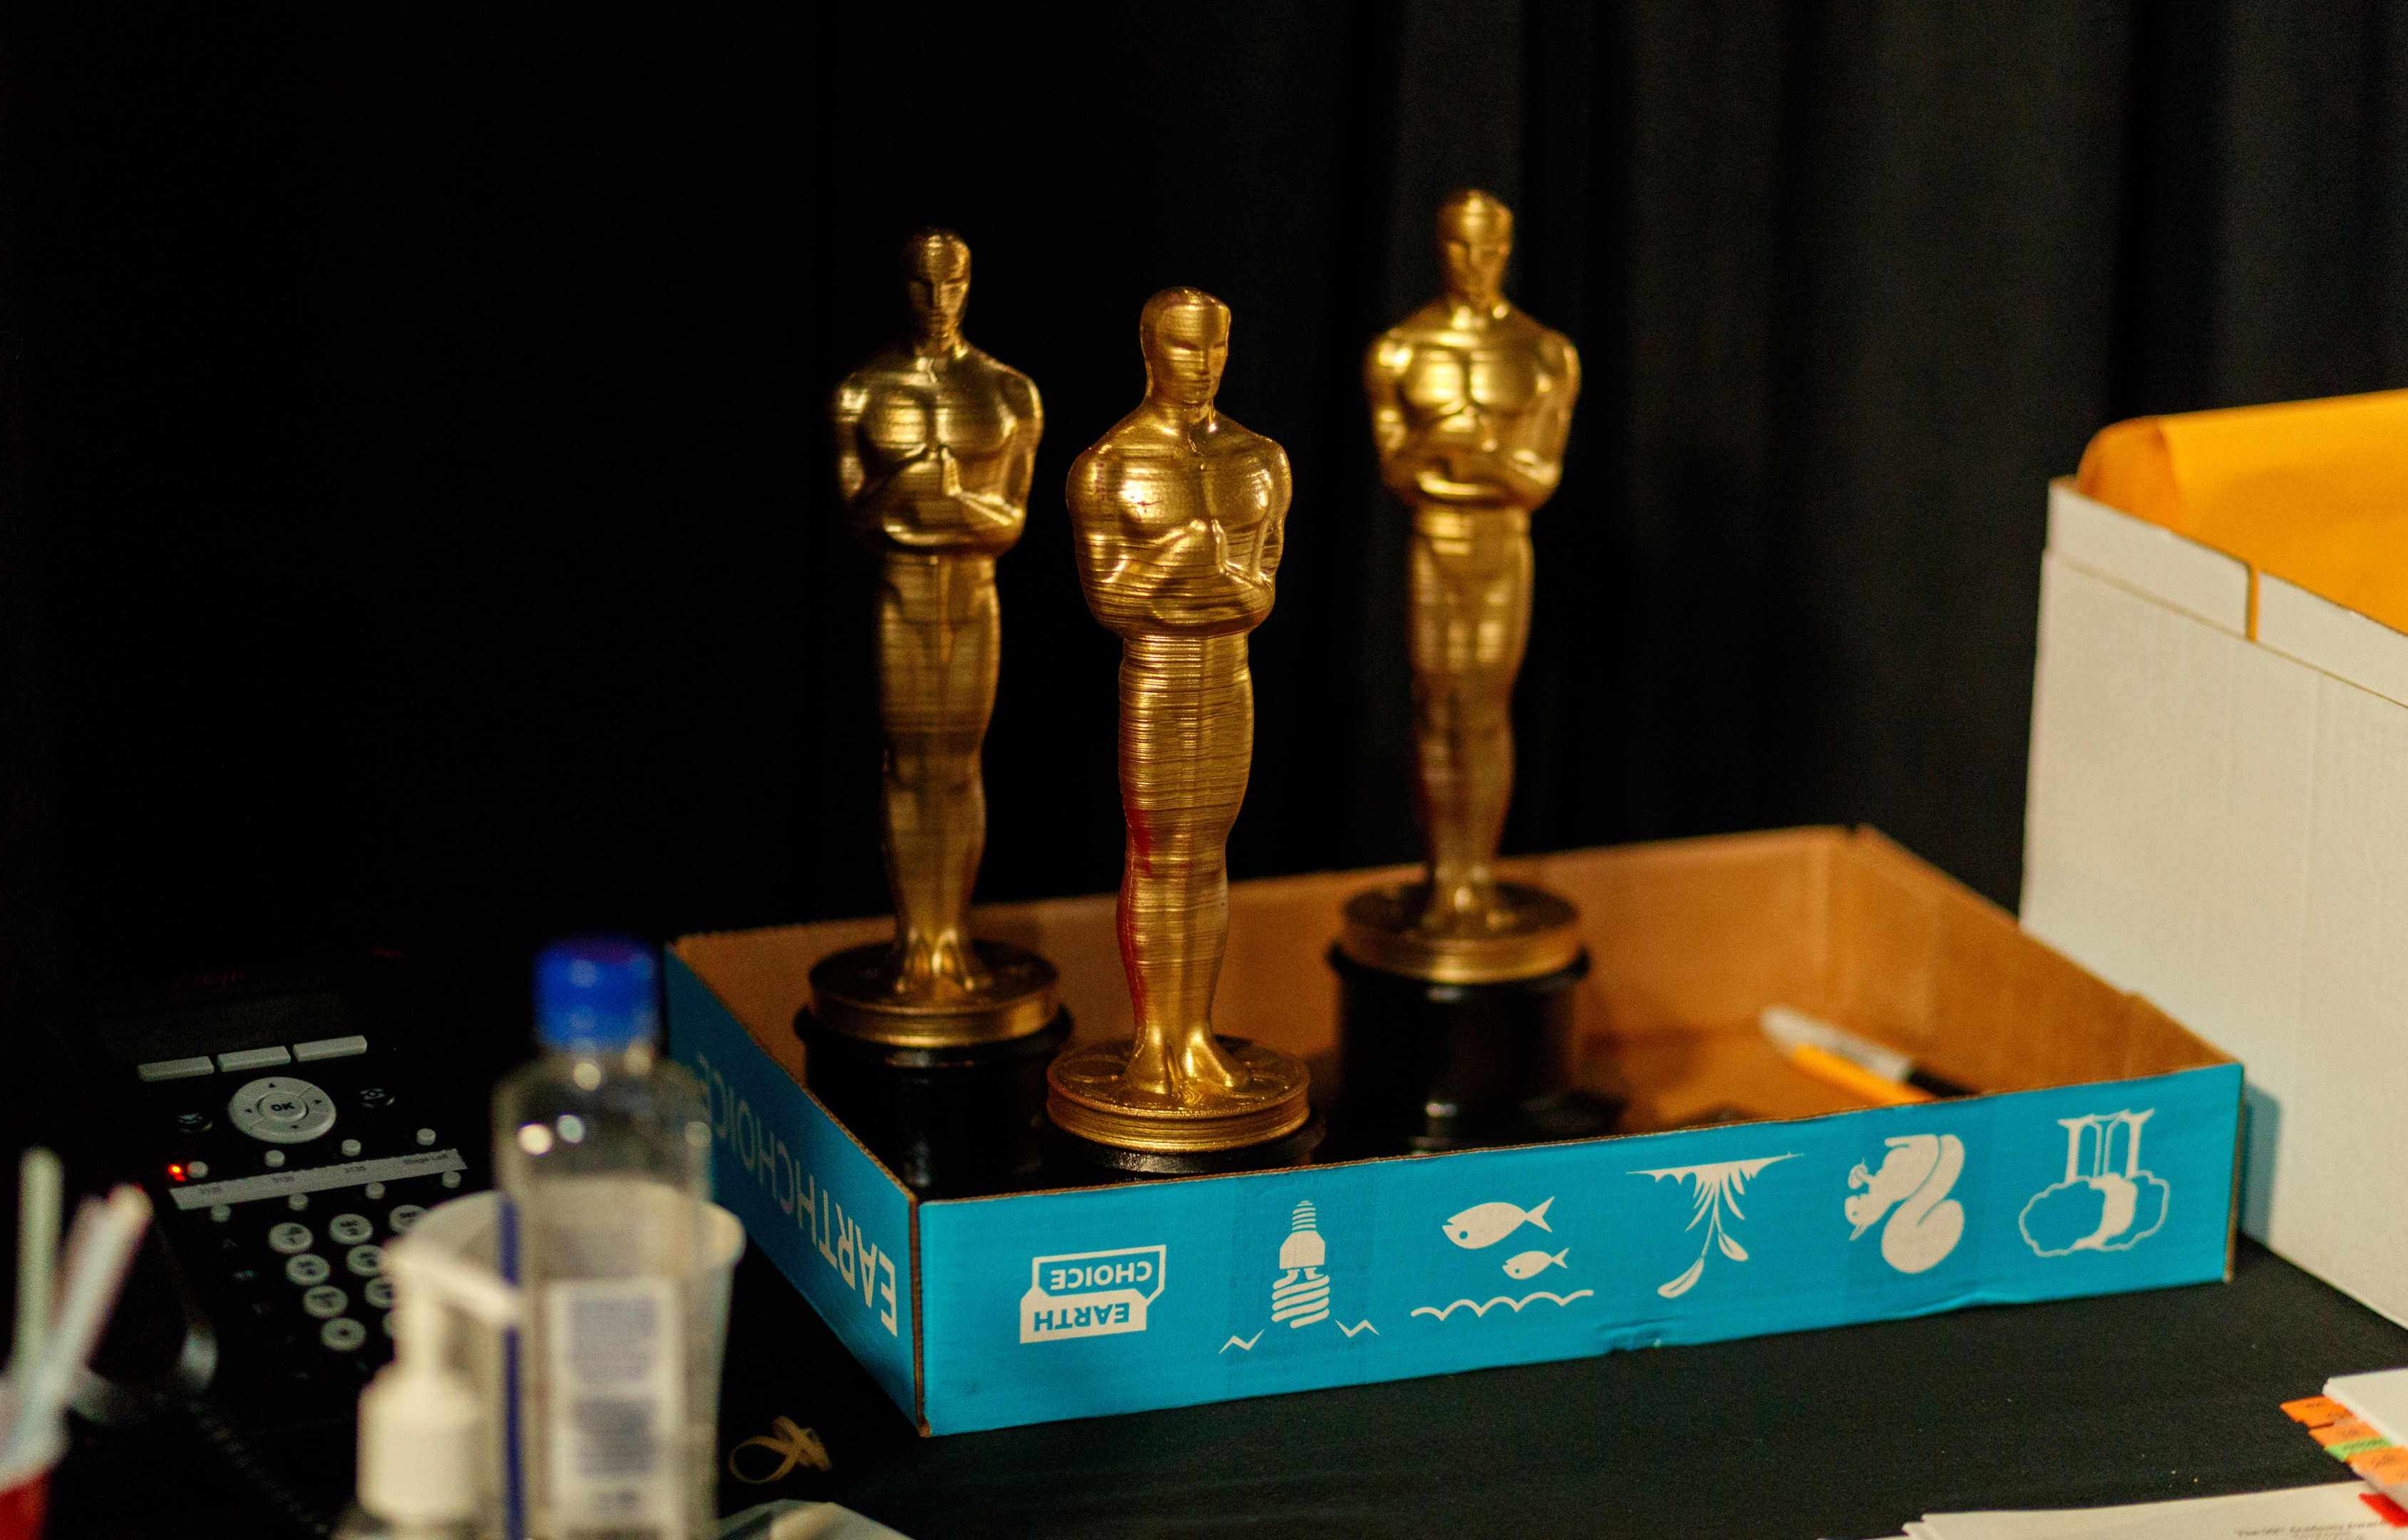 HOLLYWOOD, CA - MARCH 03:  Oscar props backstage during rehersals for the 90th Oscars at The Dolby Theatre on March 3, 2018 in Hollywood, California.  (Photo by Christopher Polk/Getty Images)